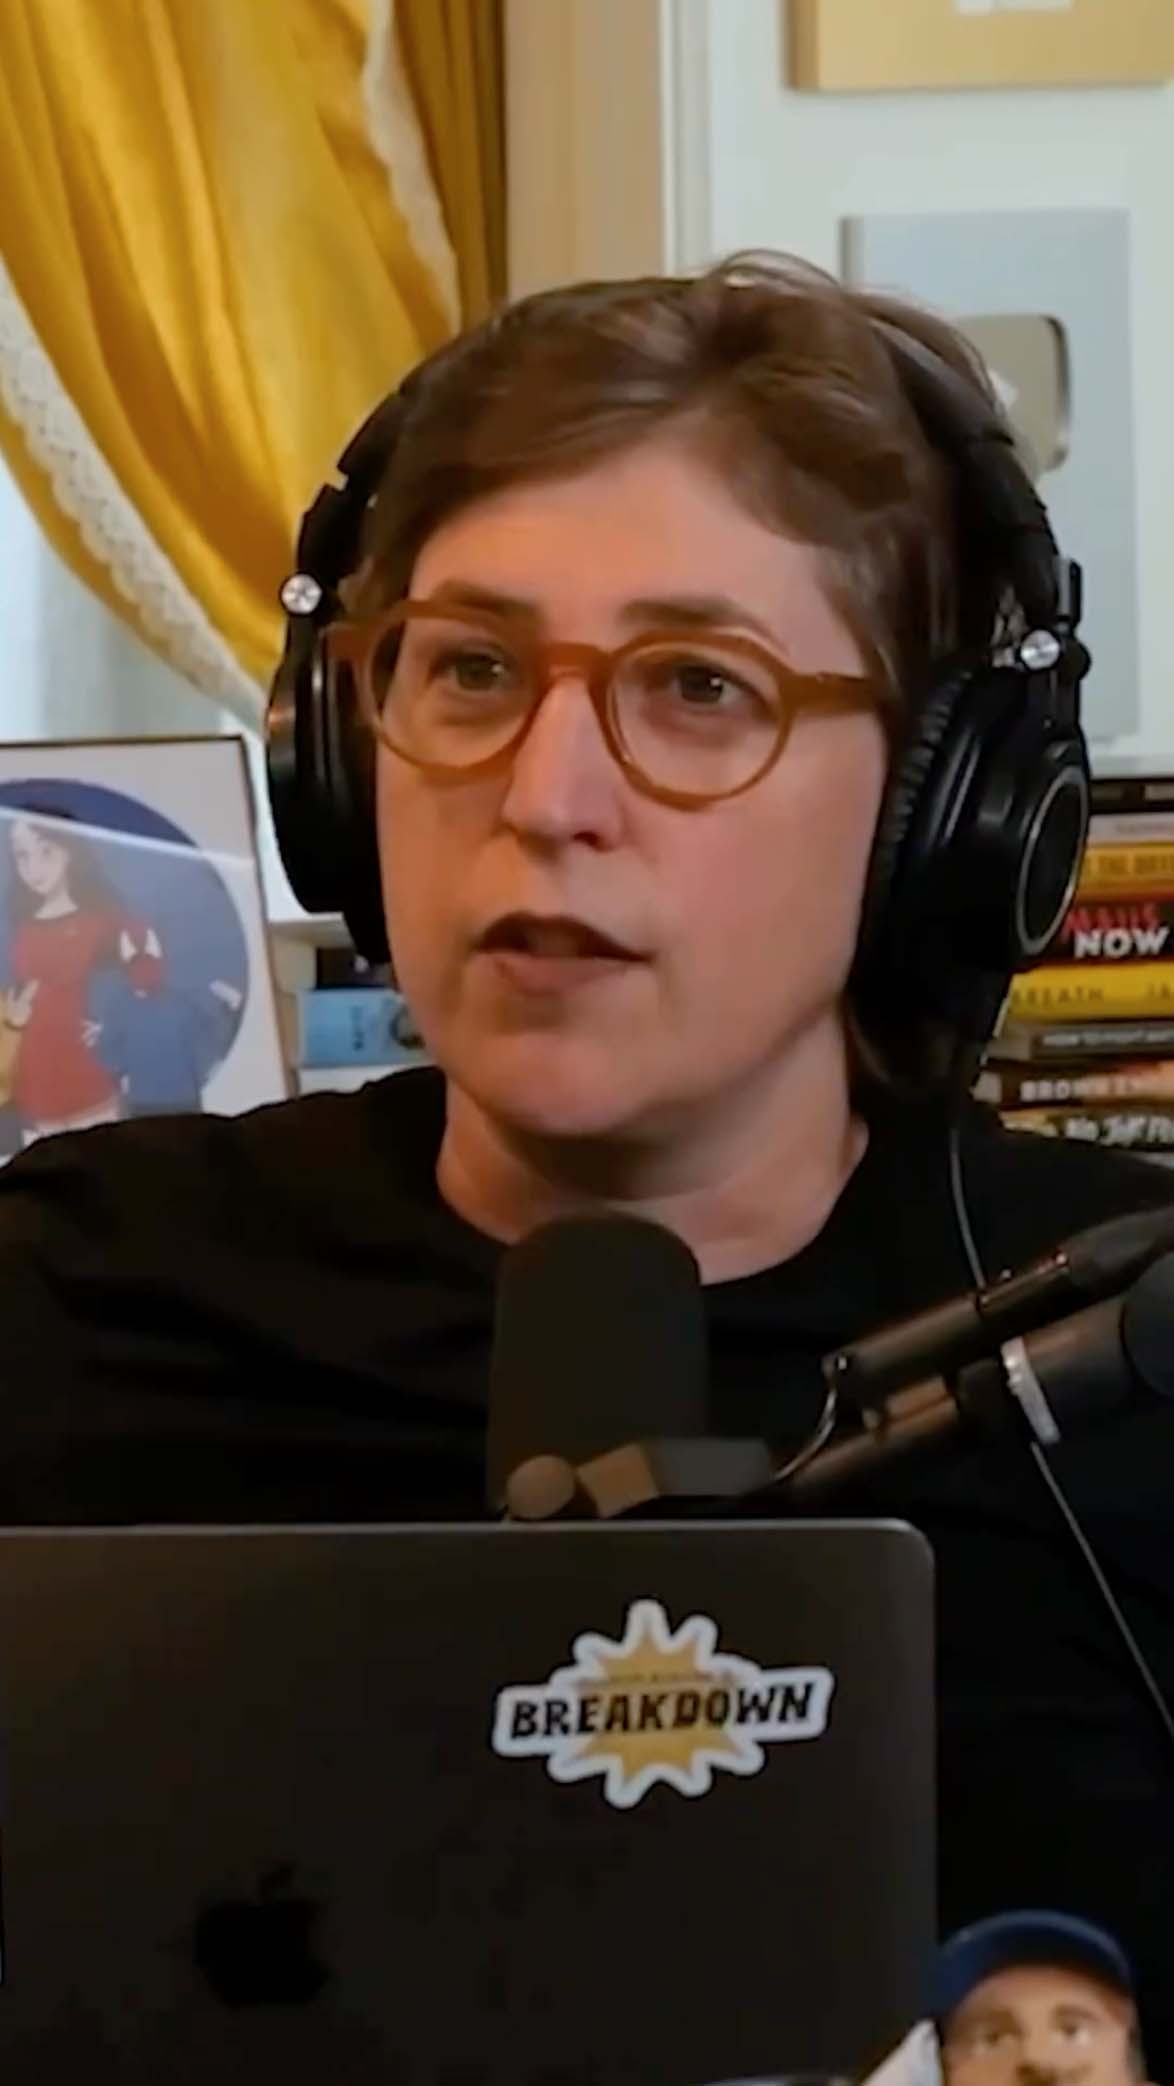 Mayim has been focusing on her personal podcast